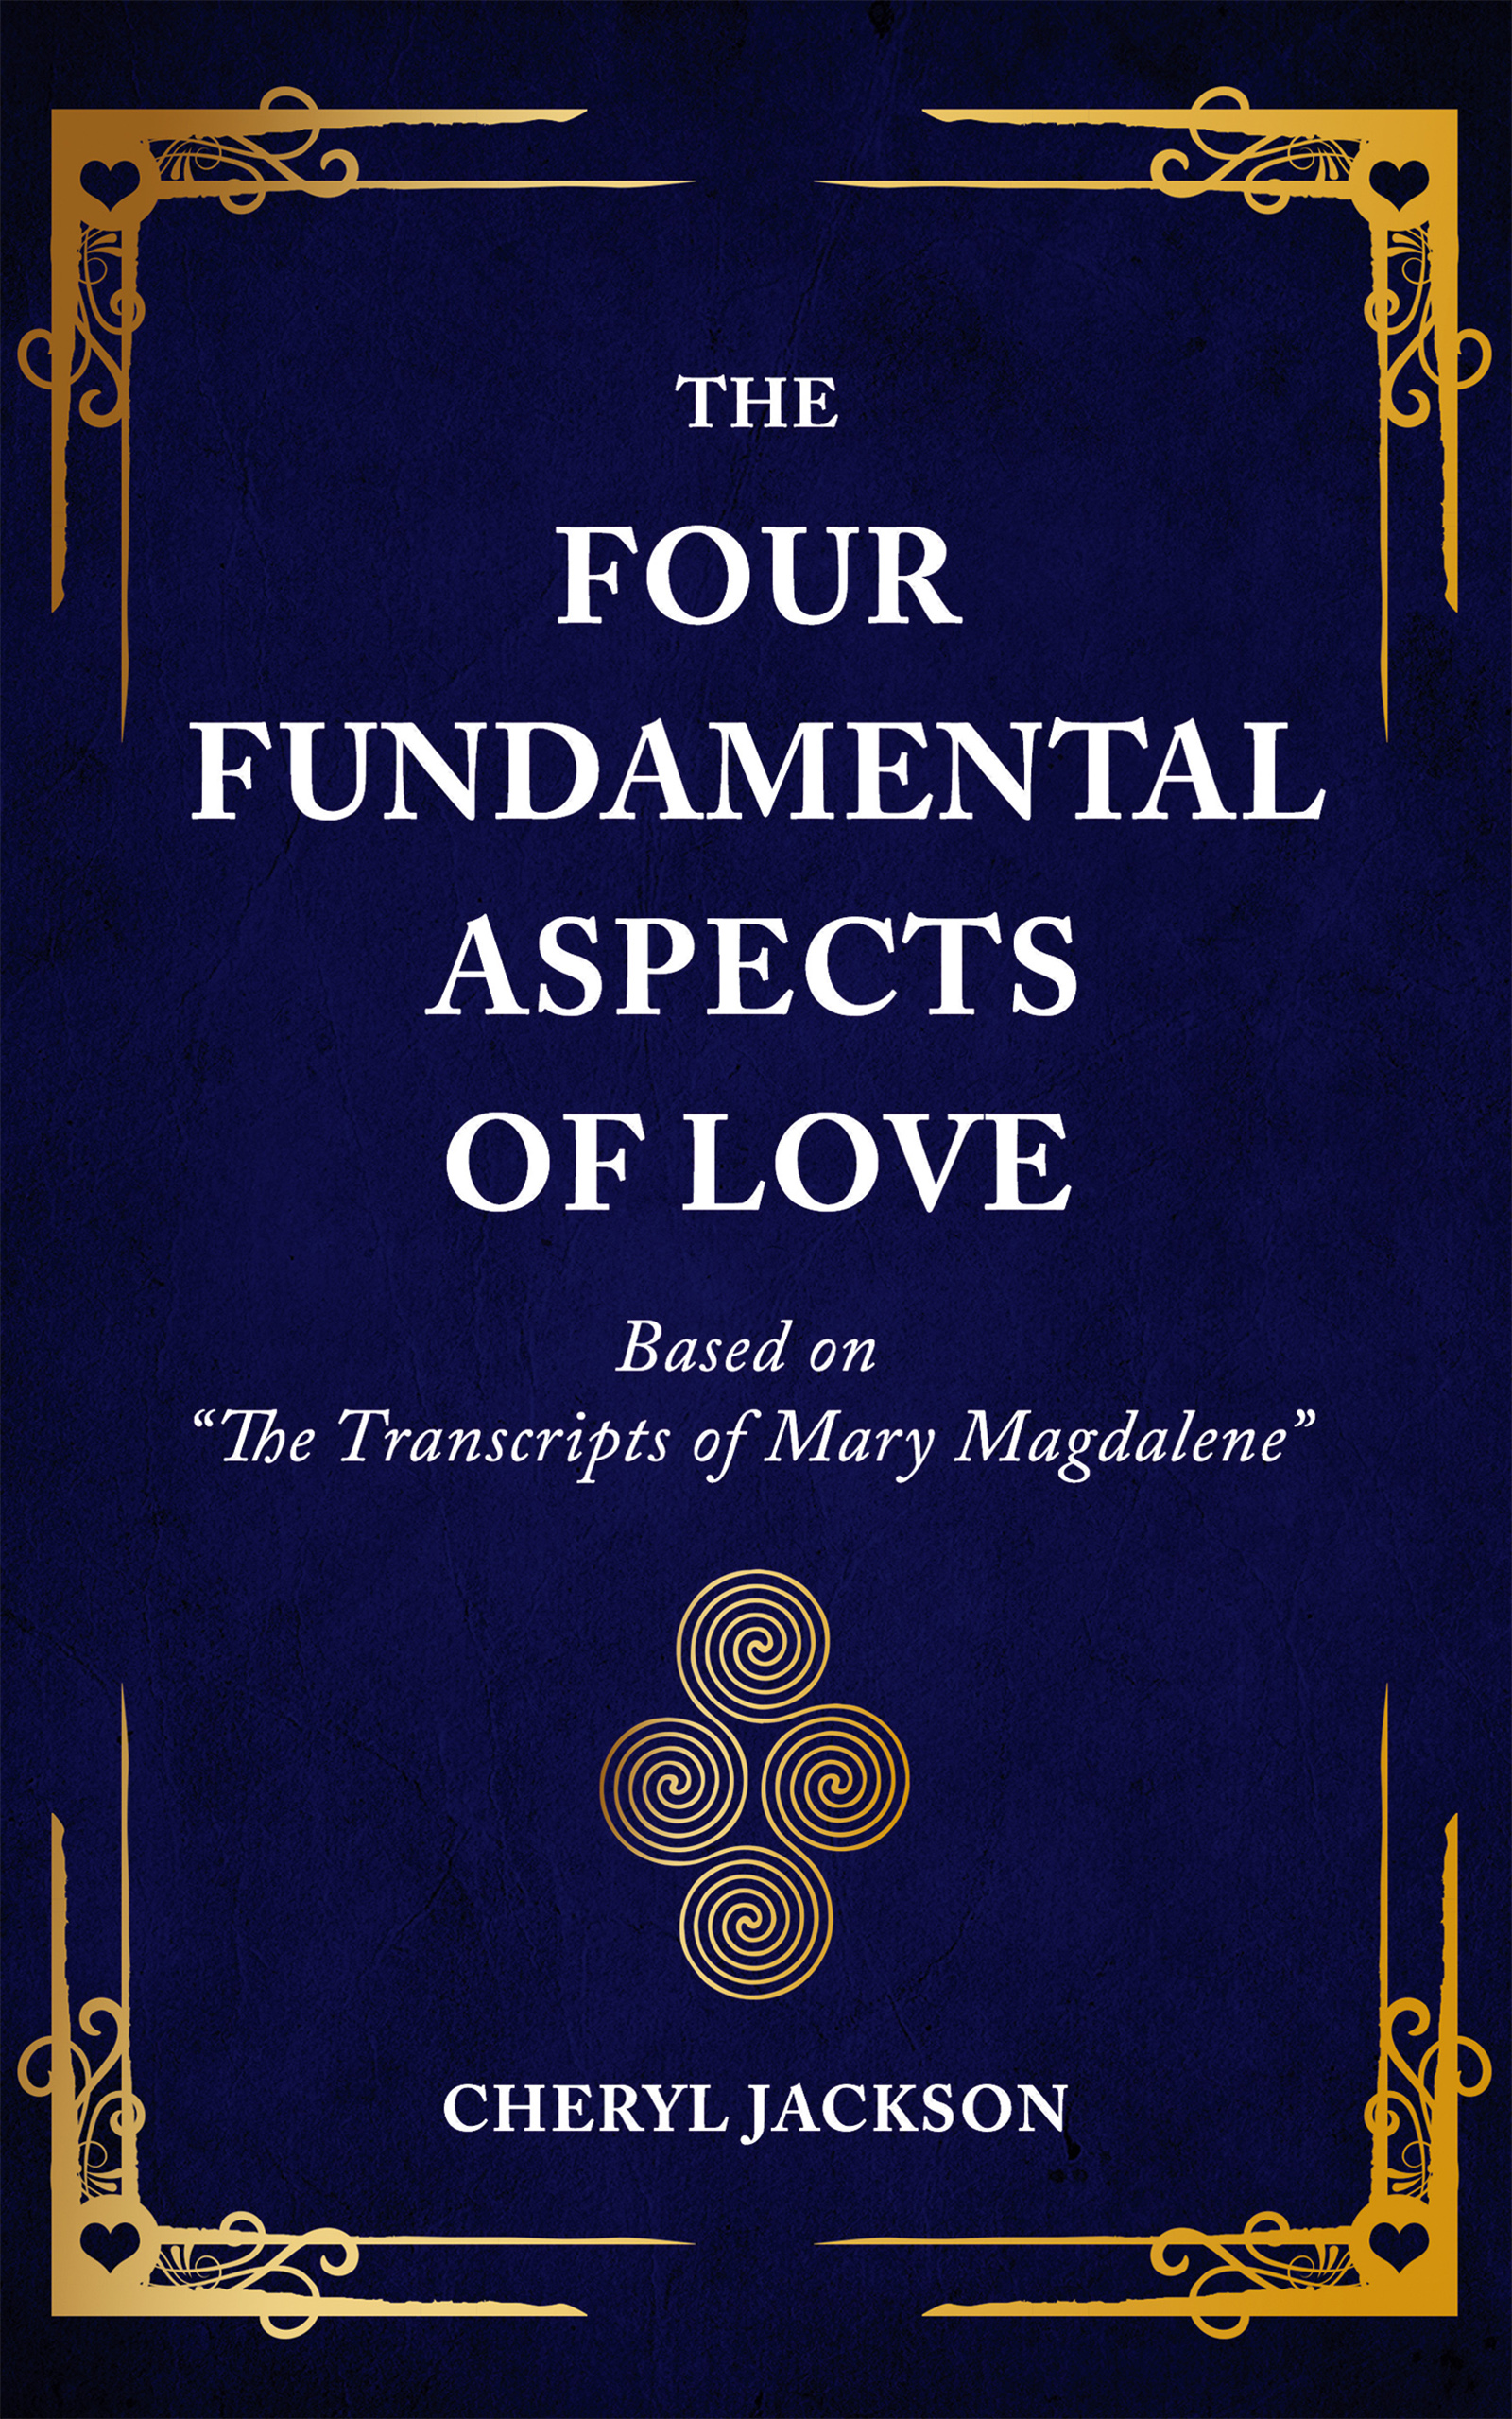 “The Four Fundamental Aspects of Love”